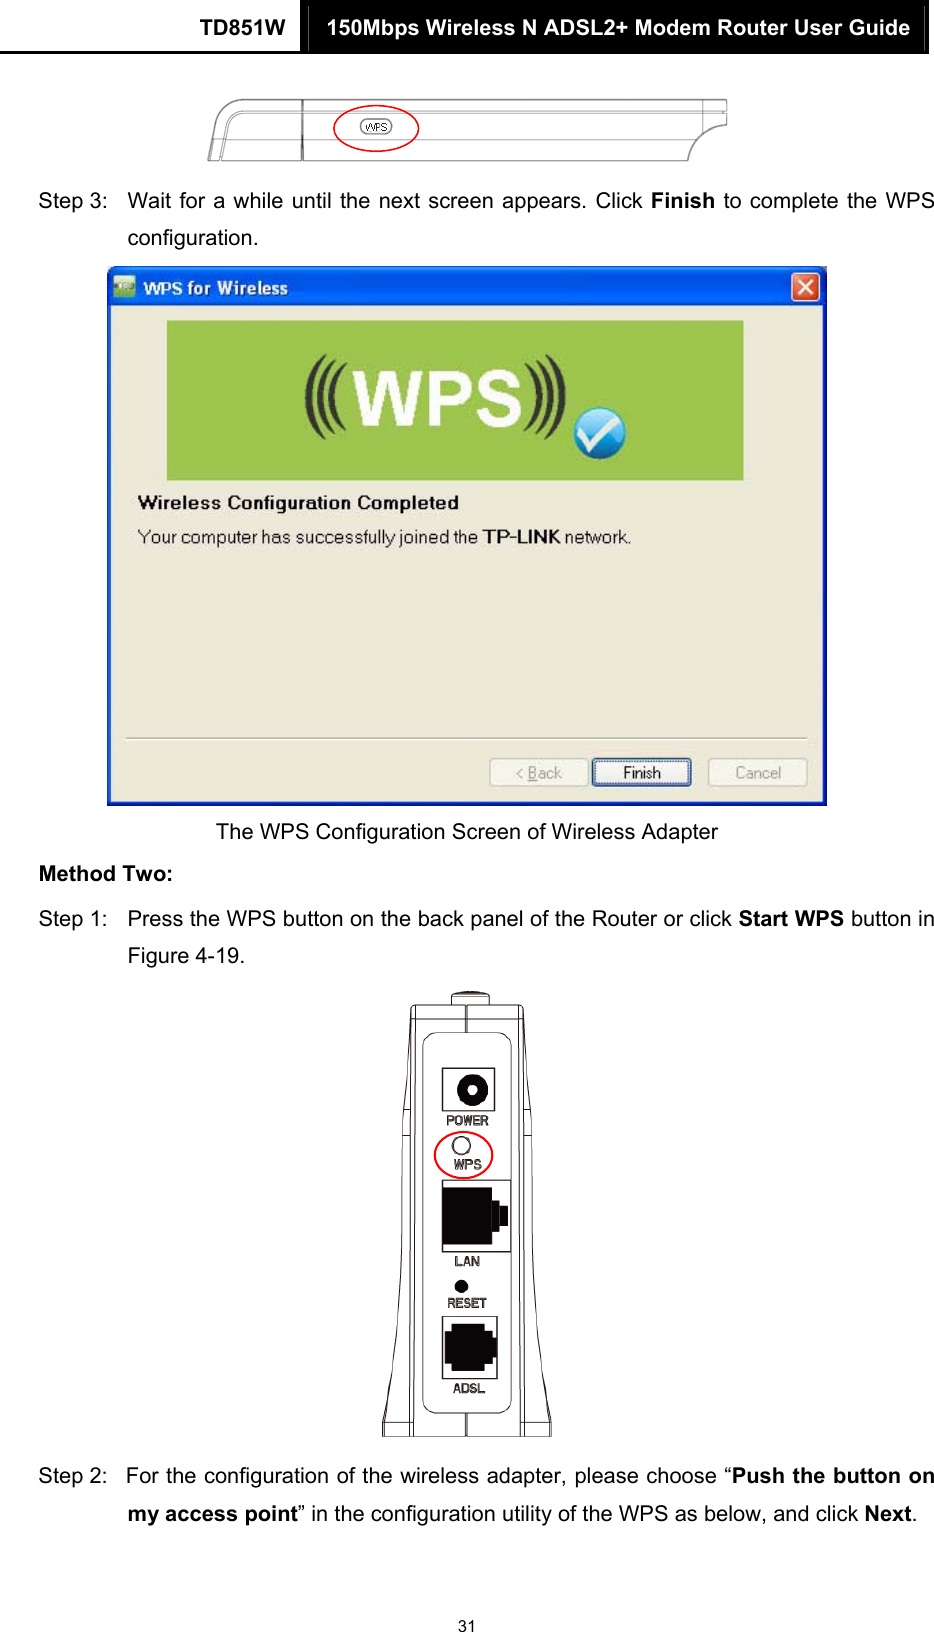 TD851W  150Mbps Wireless N ADSL2+ Modem Router User Guide 31  Step 3:  Wait for a while until the next screen appears. Click Finish to complete the WPS configuration.  The WPS Configuration Screen of Wireless Adapter   Method Two: Step 1:  Press the WPS button on the back panel of the Router or click Start WPS button in Figure 4-19.  Step 2:  For the configuration of the wireless adapter, please choose “Push the button on my access point” in the configuration utility of the WPS as below, and click Next.  